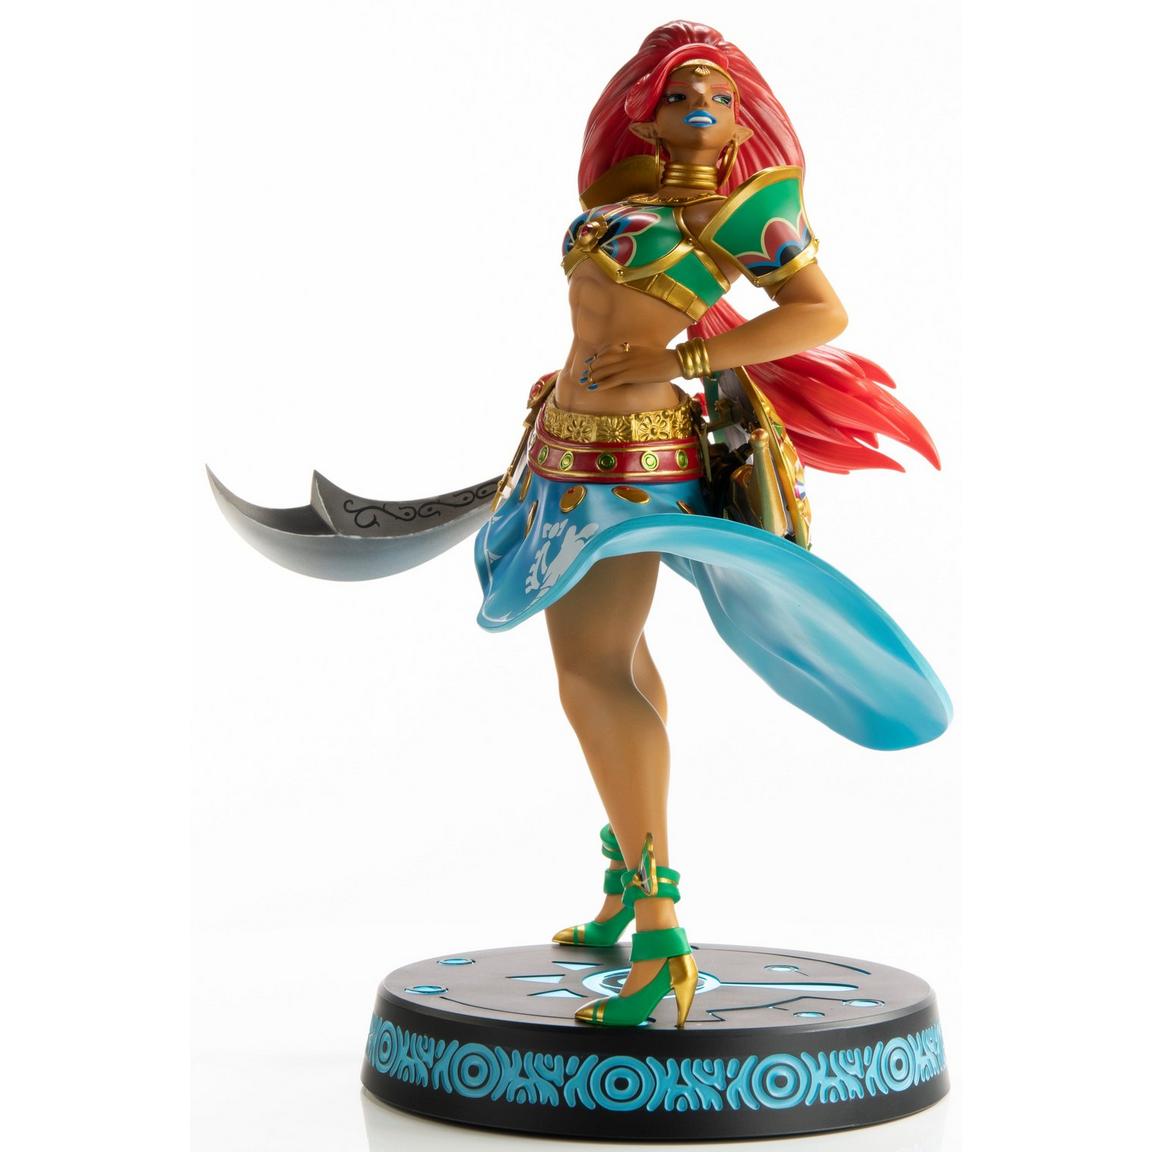 Urbosa Collector's Edition Statue by First 4 Figures